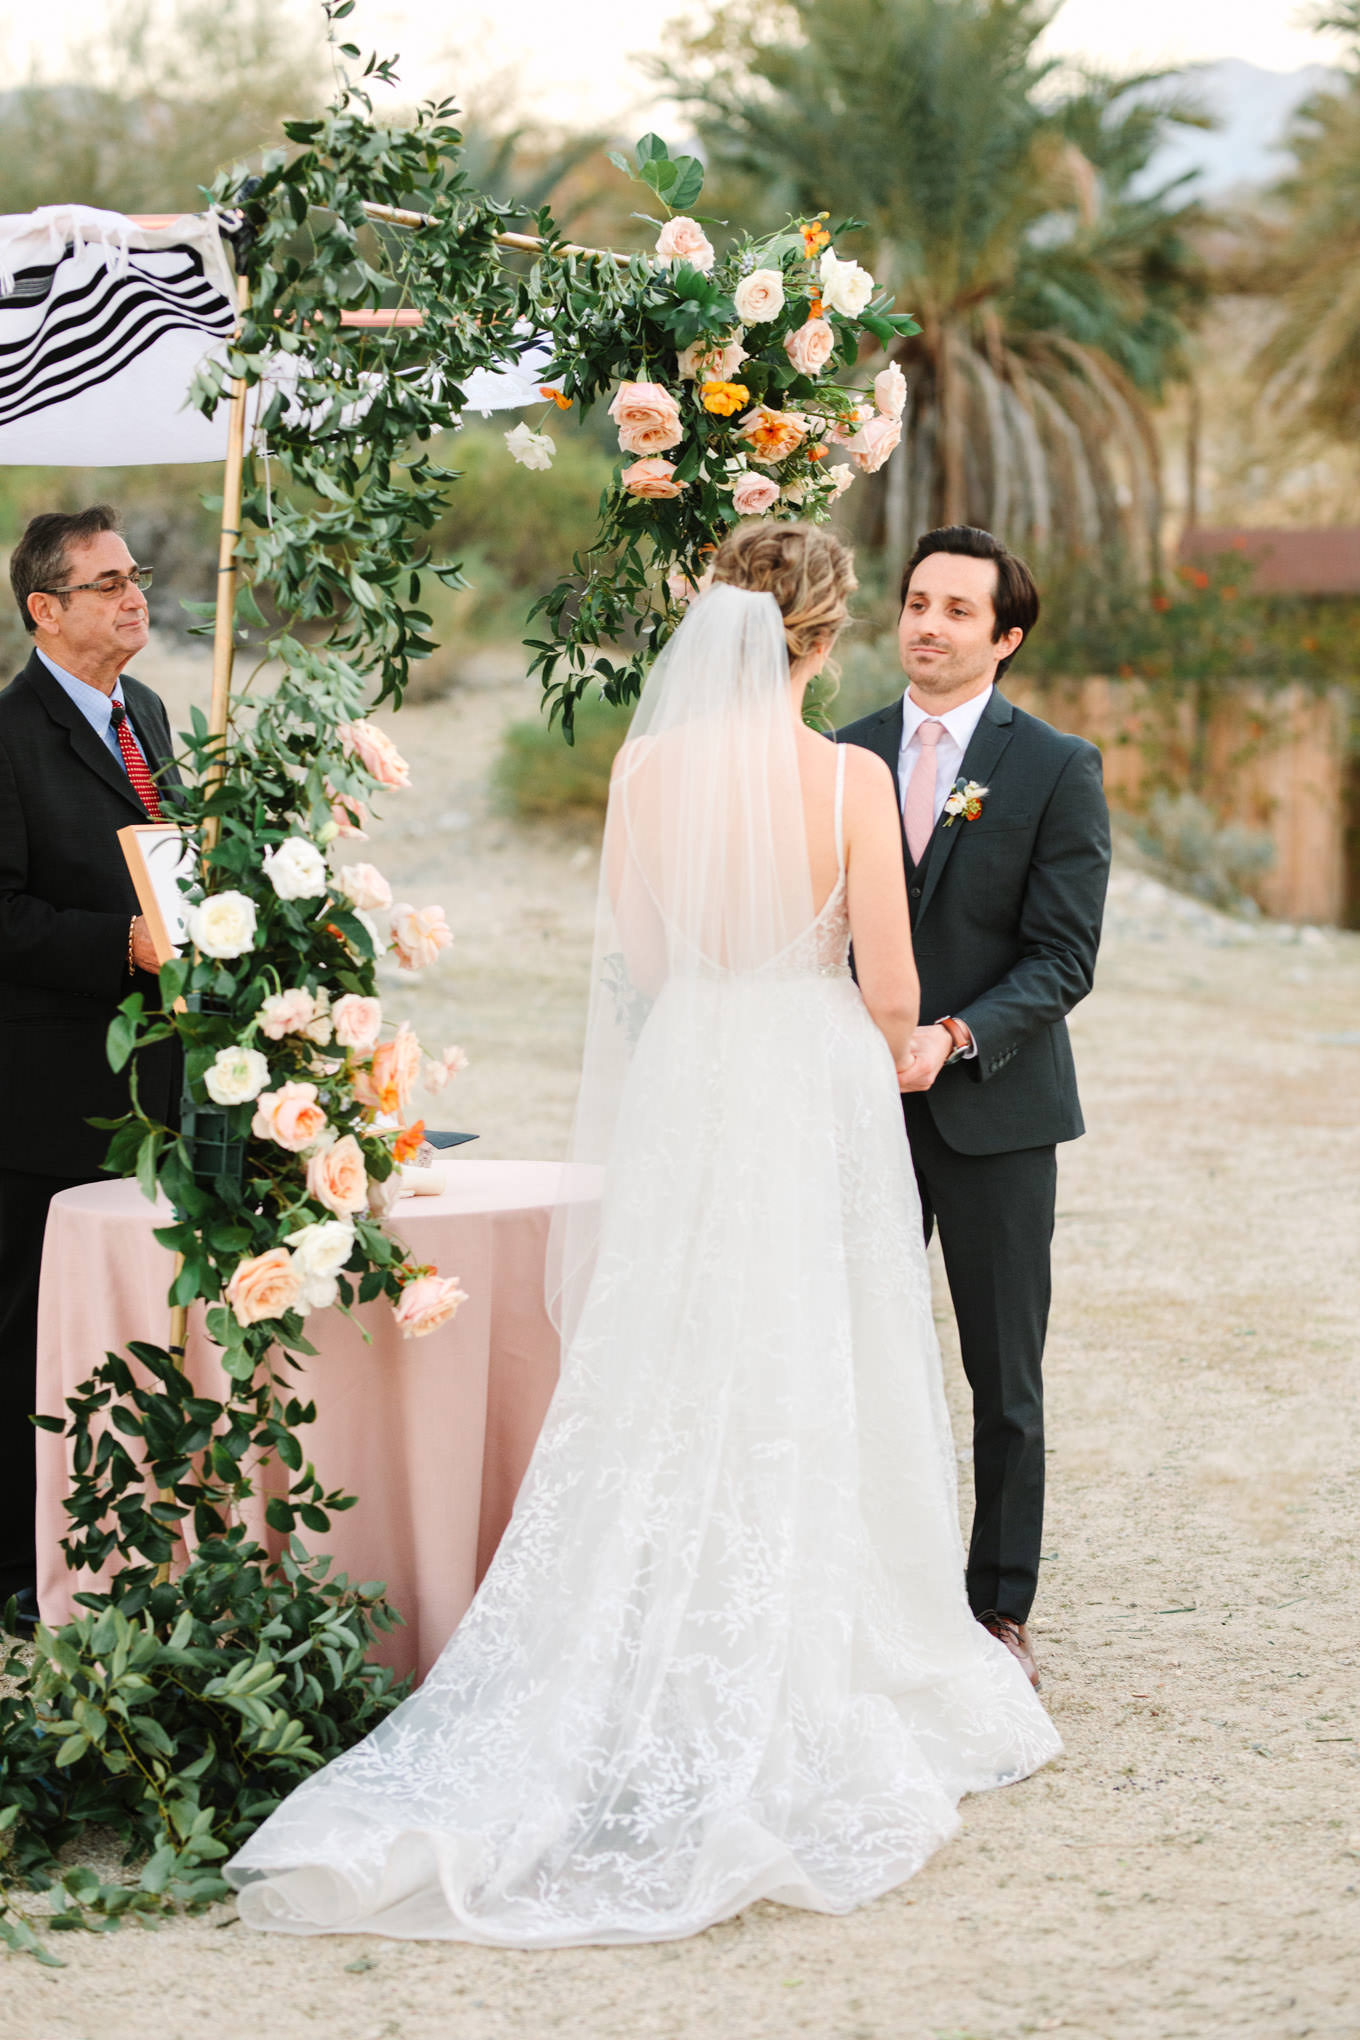 Bride and groom during wedding ceremony | Living Desert Zoo & Gardens wedding with unique details | Elevated and colorful wedding photography for fun-loving couples in Southern California |  #PalmSprings #palmspringsphotographer #gardenwedding #palmspringswedding  Source: Mary Costa Photography | Los Angeles wedding photographer 